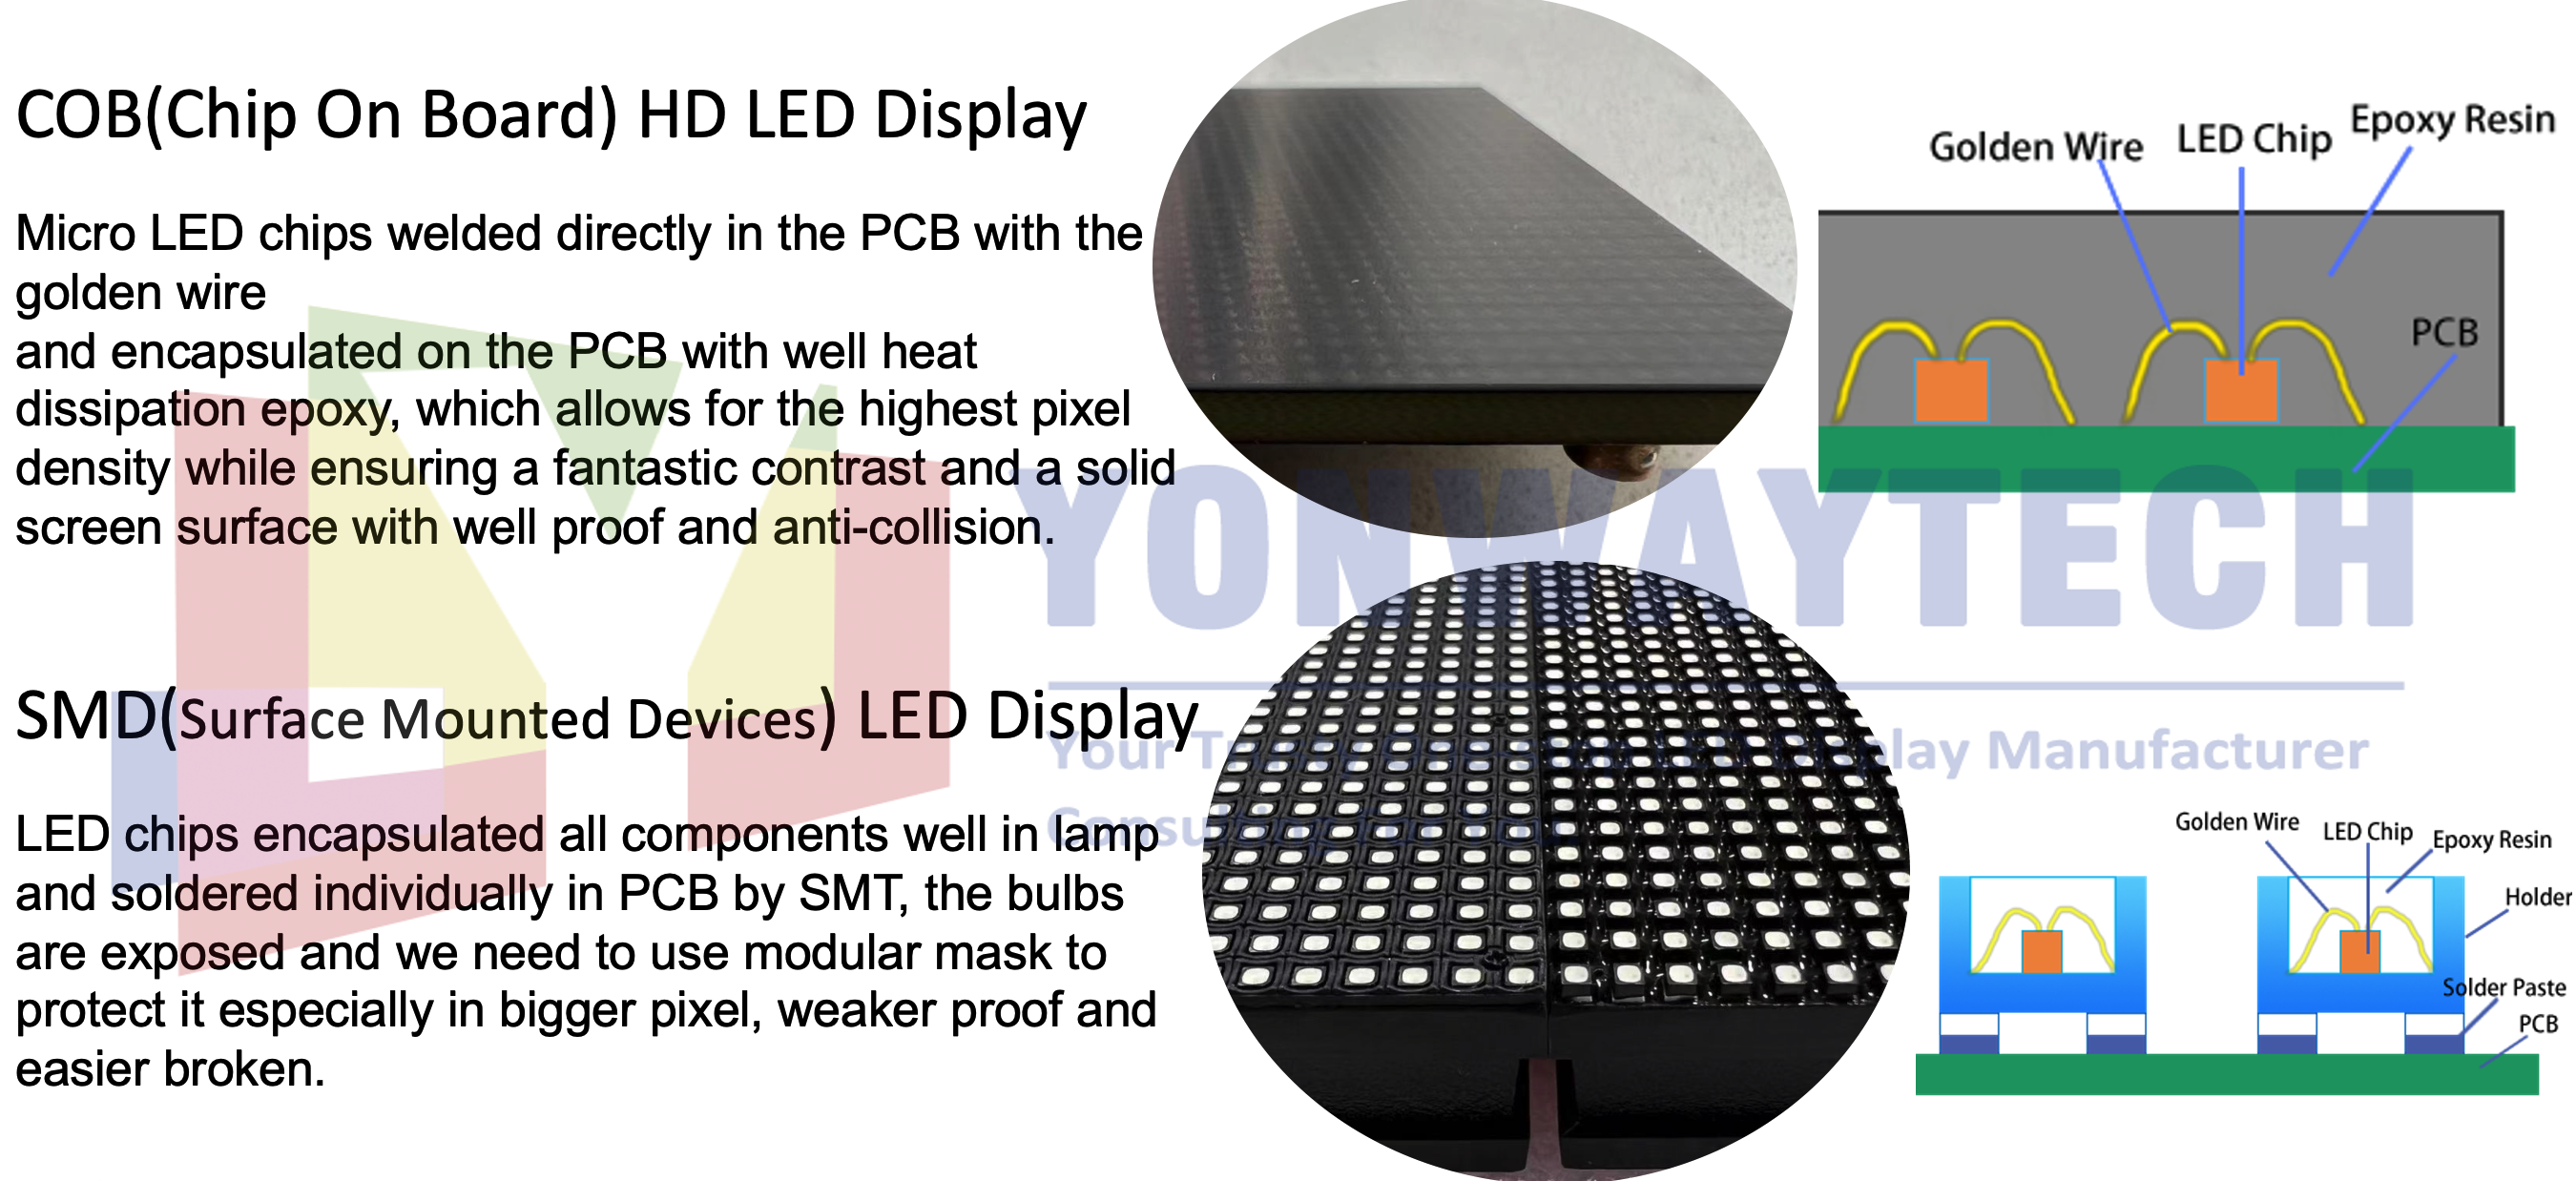 Comparison of smd and cob yonwaytech led display